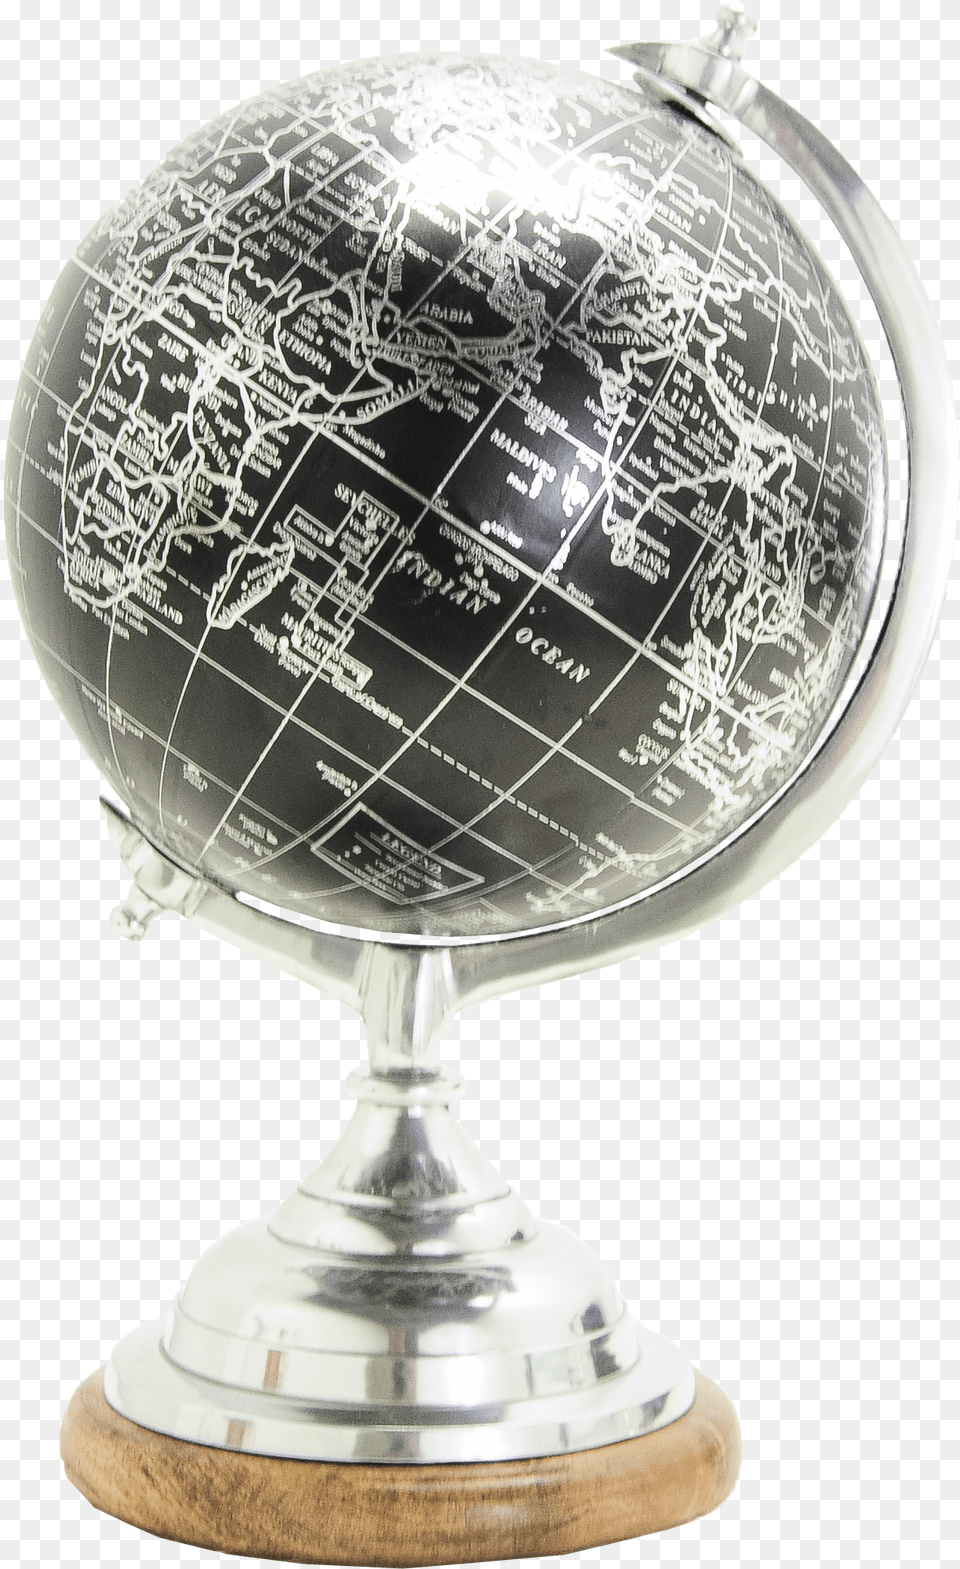 Cornerstone Home Interiors Globe, Astronomy, Outer Space, Planet, Smoke Pipe Png Image